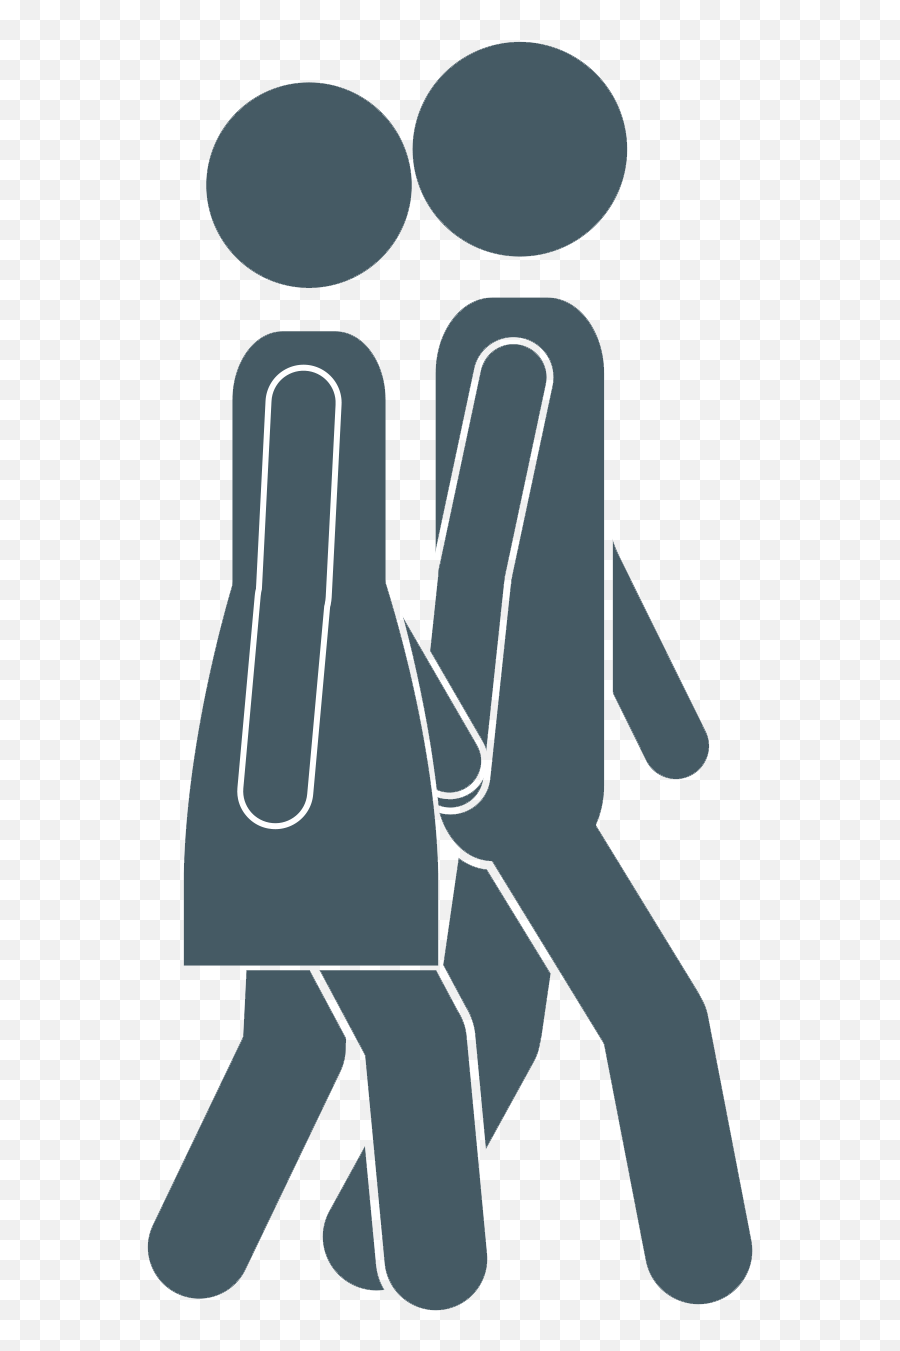 Save - Walking Man And Woman Graphic 1563x1563 Png Walking Man And Woman Icon Emoji,Woman Walking Clipart